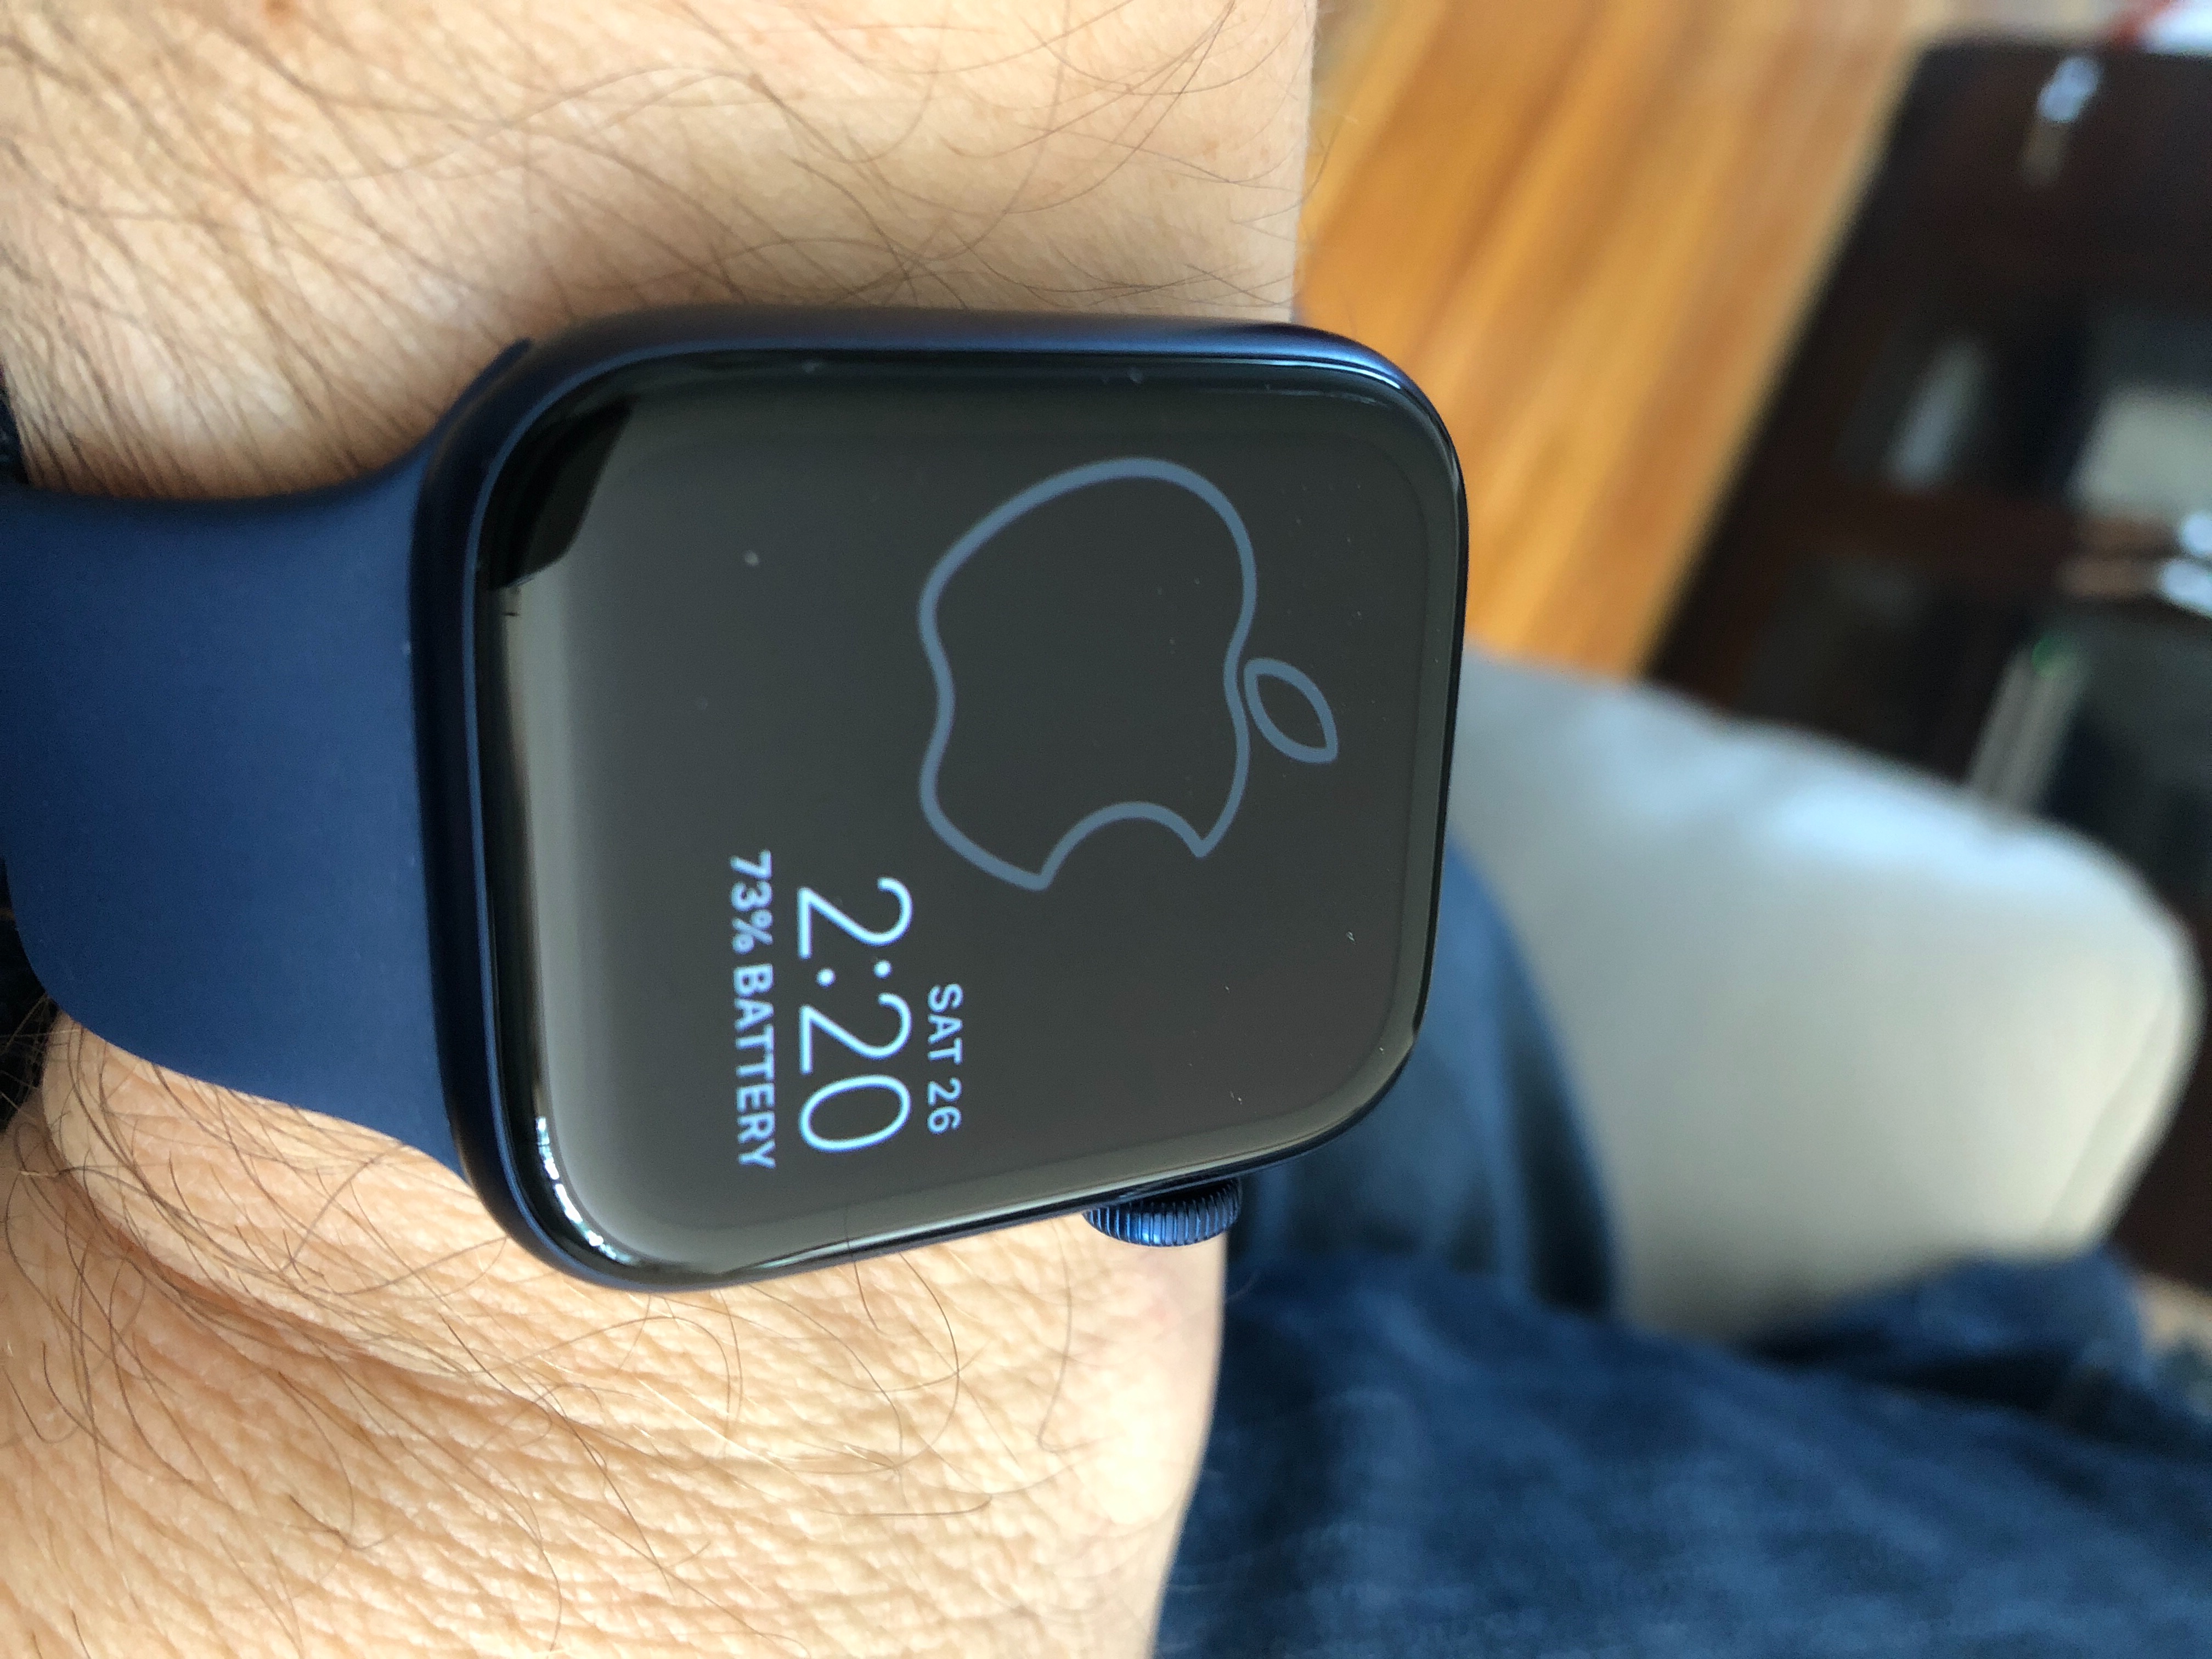 does apple watch play music without headphones